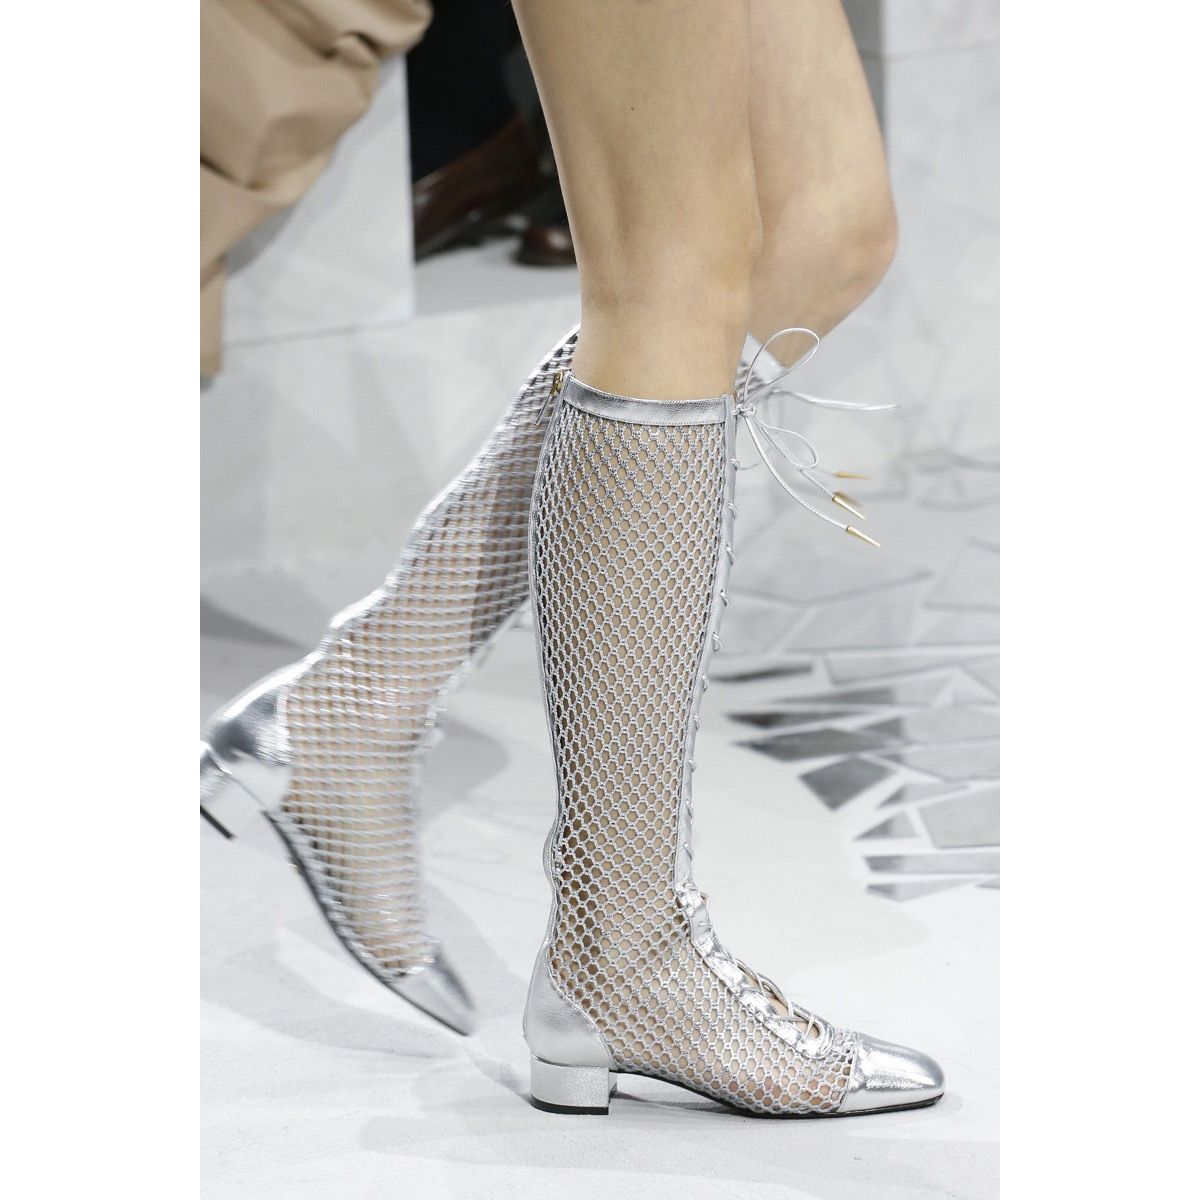 Christian Dior Naughtily-D Fishnet Lace-Up Boots (EU37)